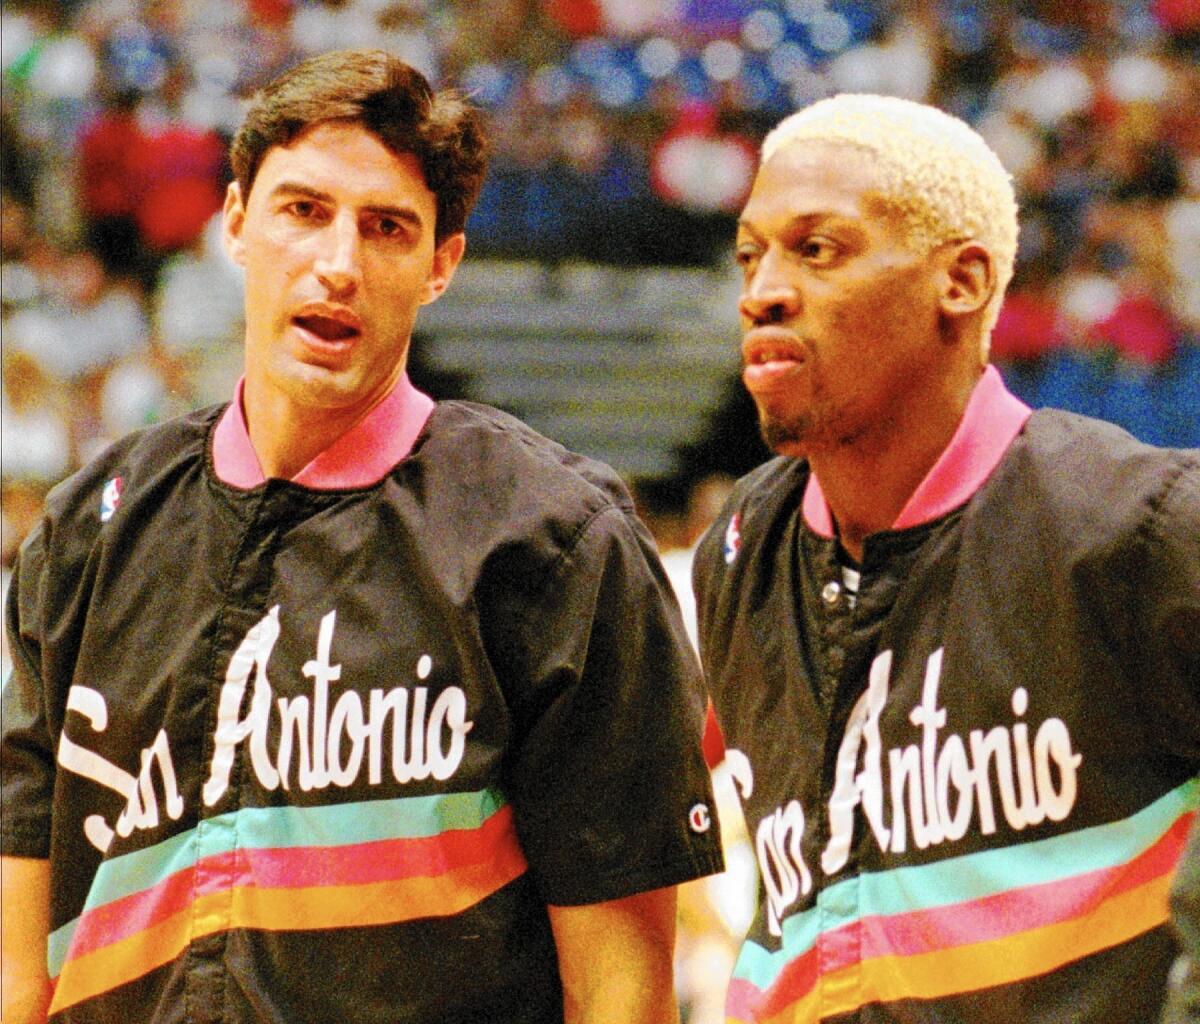 Jack Haley, left, was known for his close ties to Dennis Rodman but bristled at being called "Rodman's babysitter."